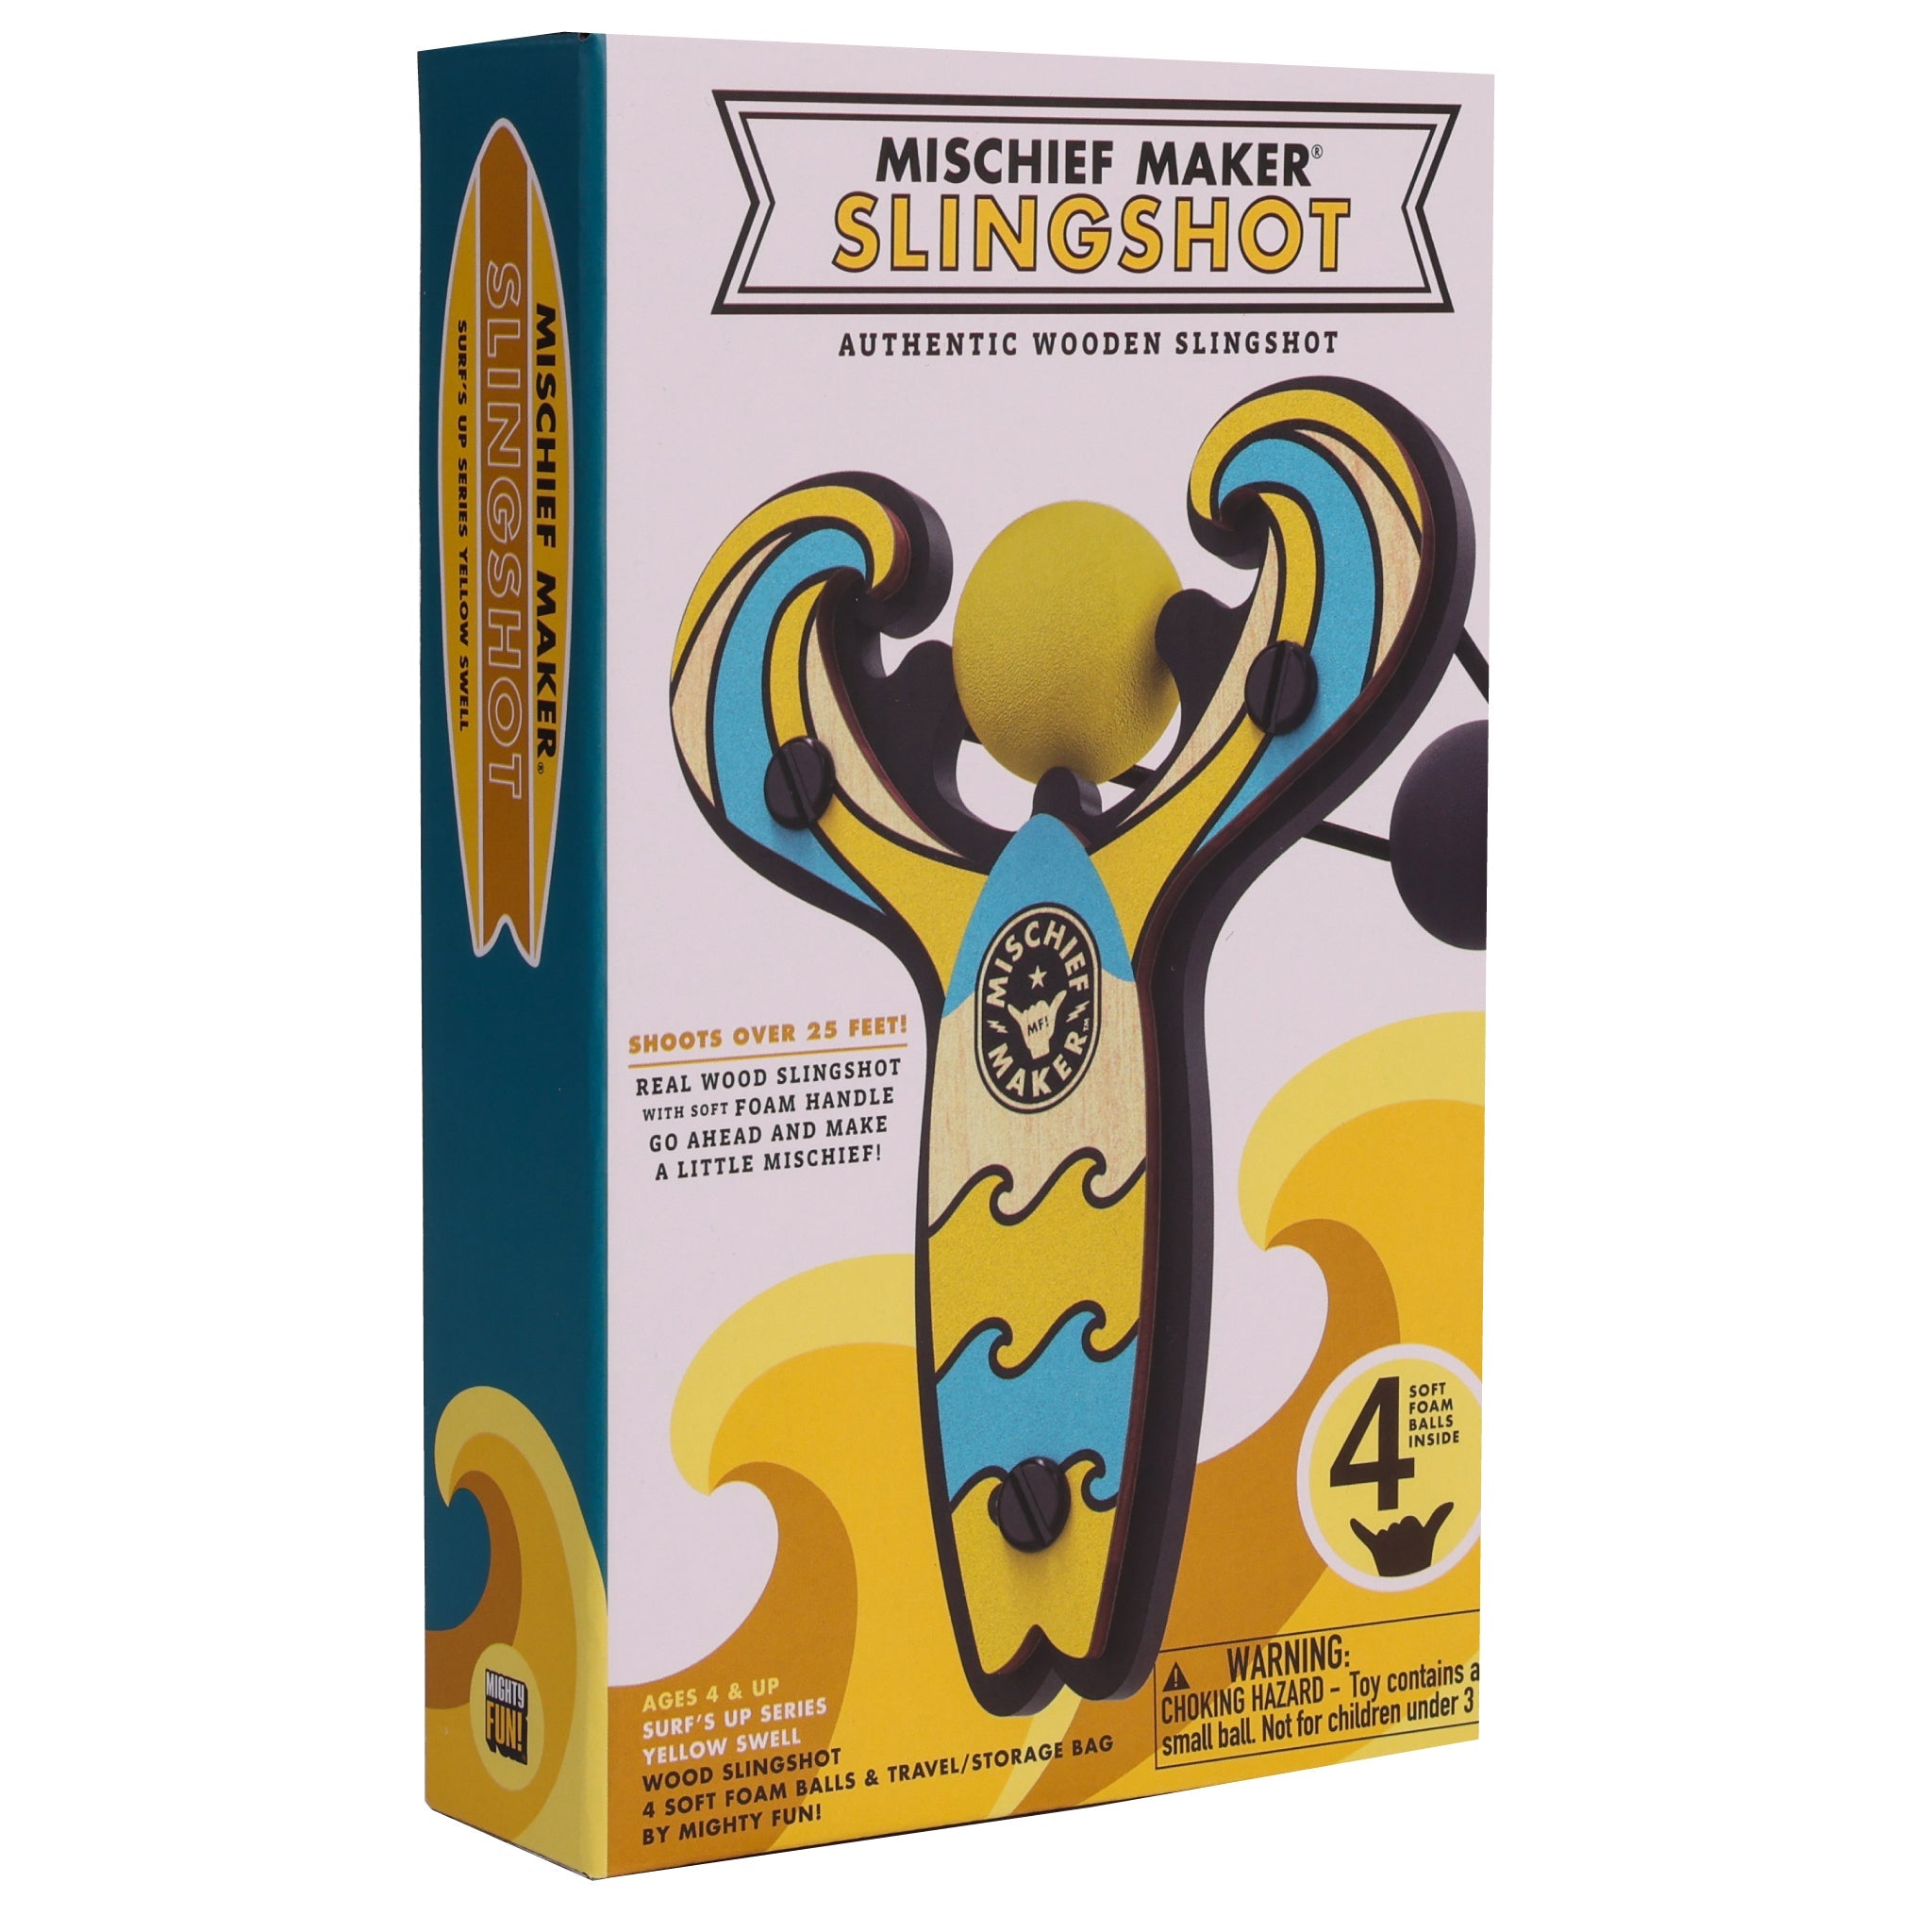 Yellow Surf’s Up toy slingshot color kids gift box. Mischief Maker by Mighty Fun!